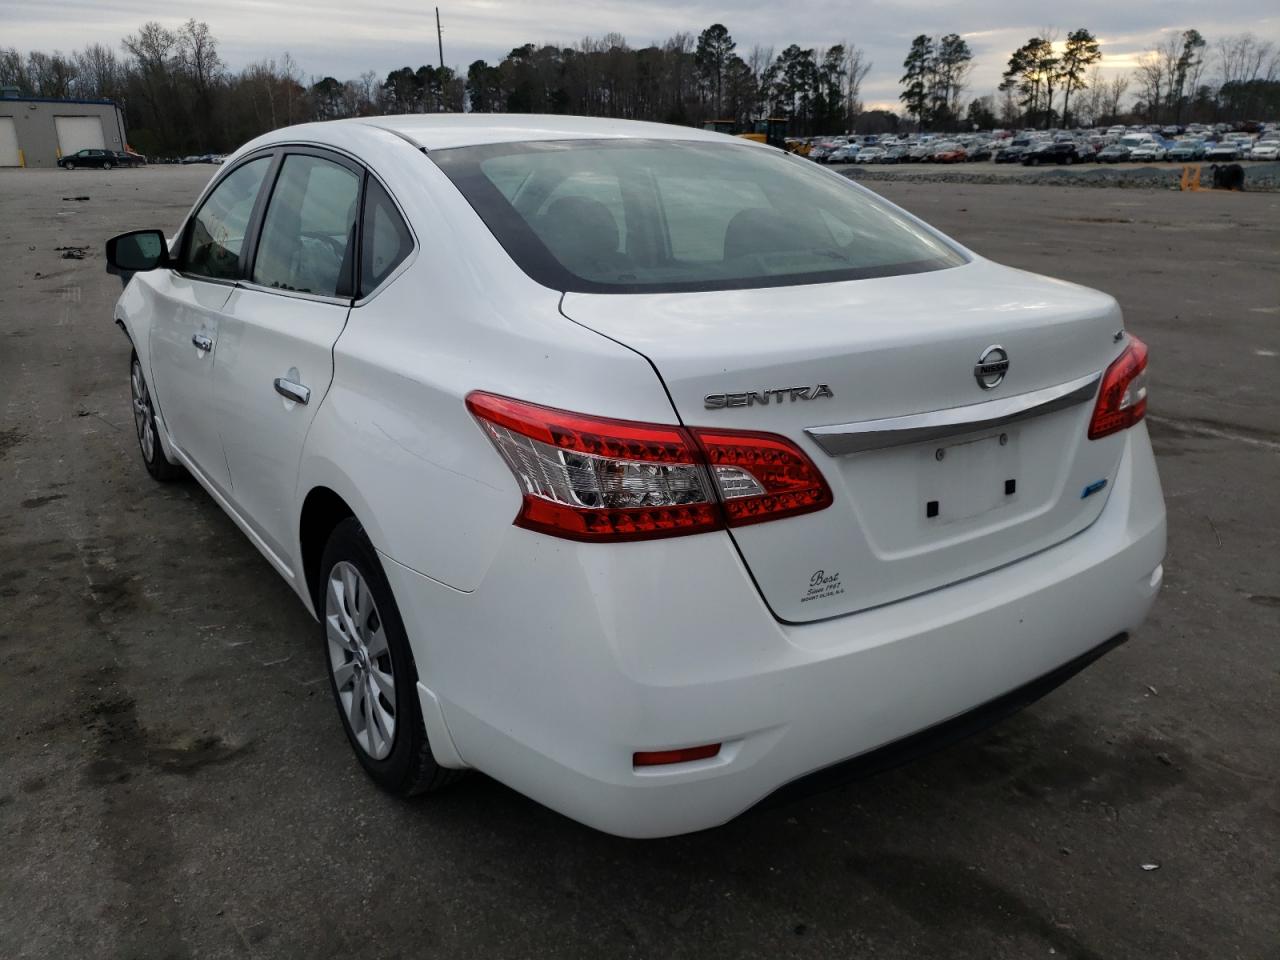 2014 NISSAN SENTRA S VIN: 3N1AB7APXEY292856